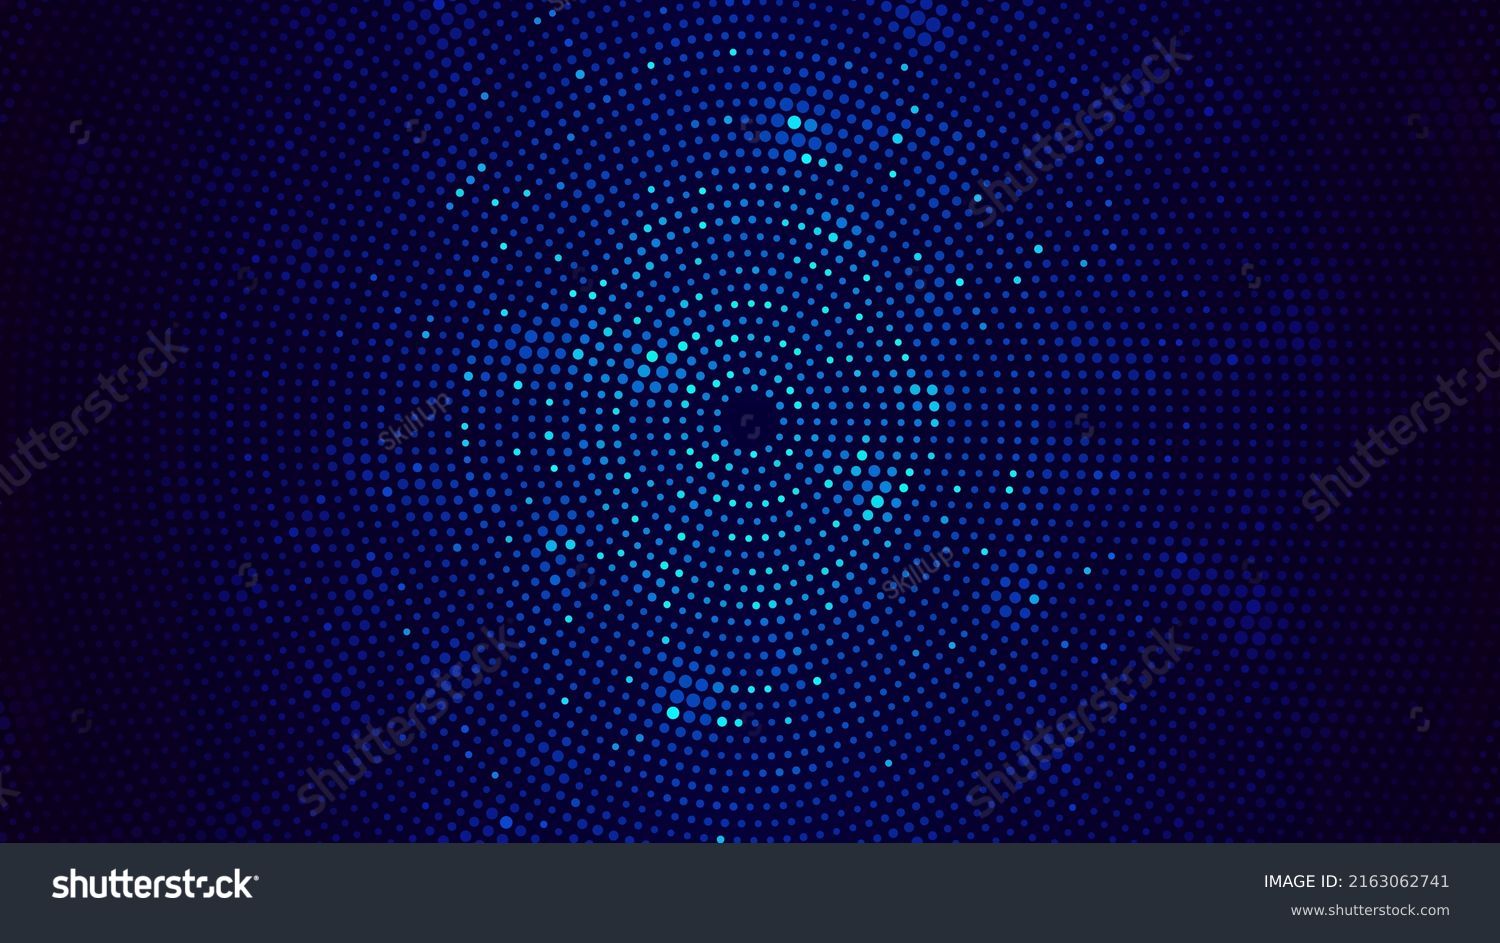 Abstract Digital Circles of Particles with Noise. Futuristic Circular Sound Wave. Big Data Visualization. 3D Virtual Space VR Cyberspace. Crypto Currency Concept. Vector Illustration. #2163062741